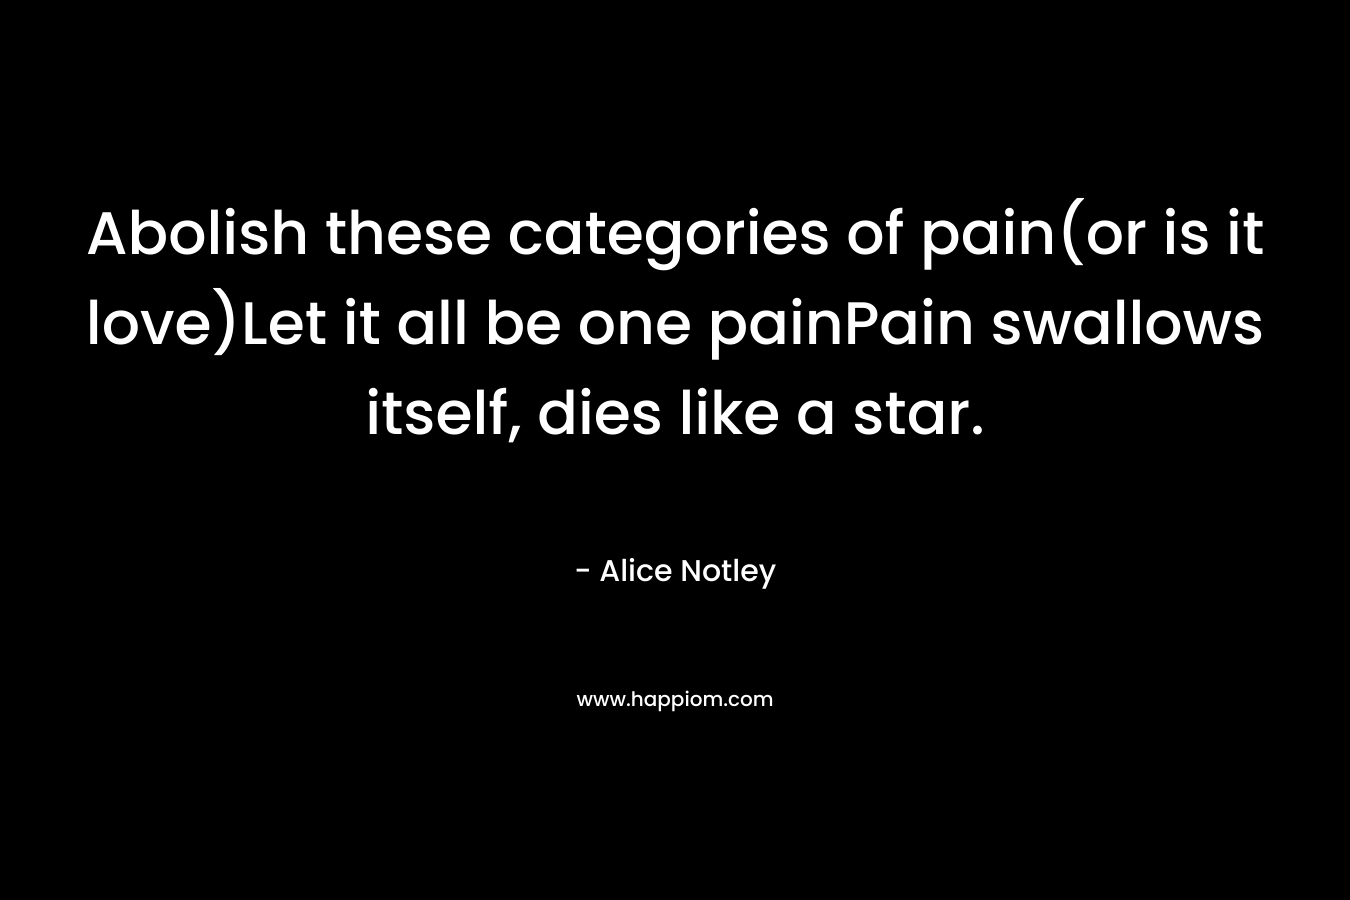 Abolish these categories of pain(or is it love)Let it all be one painPain swallows itself, dies like a star.